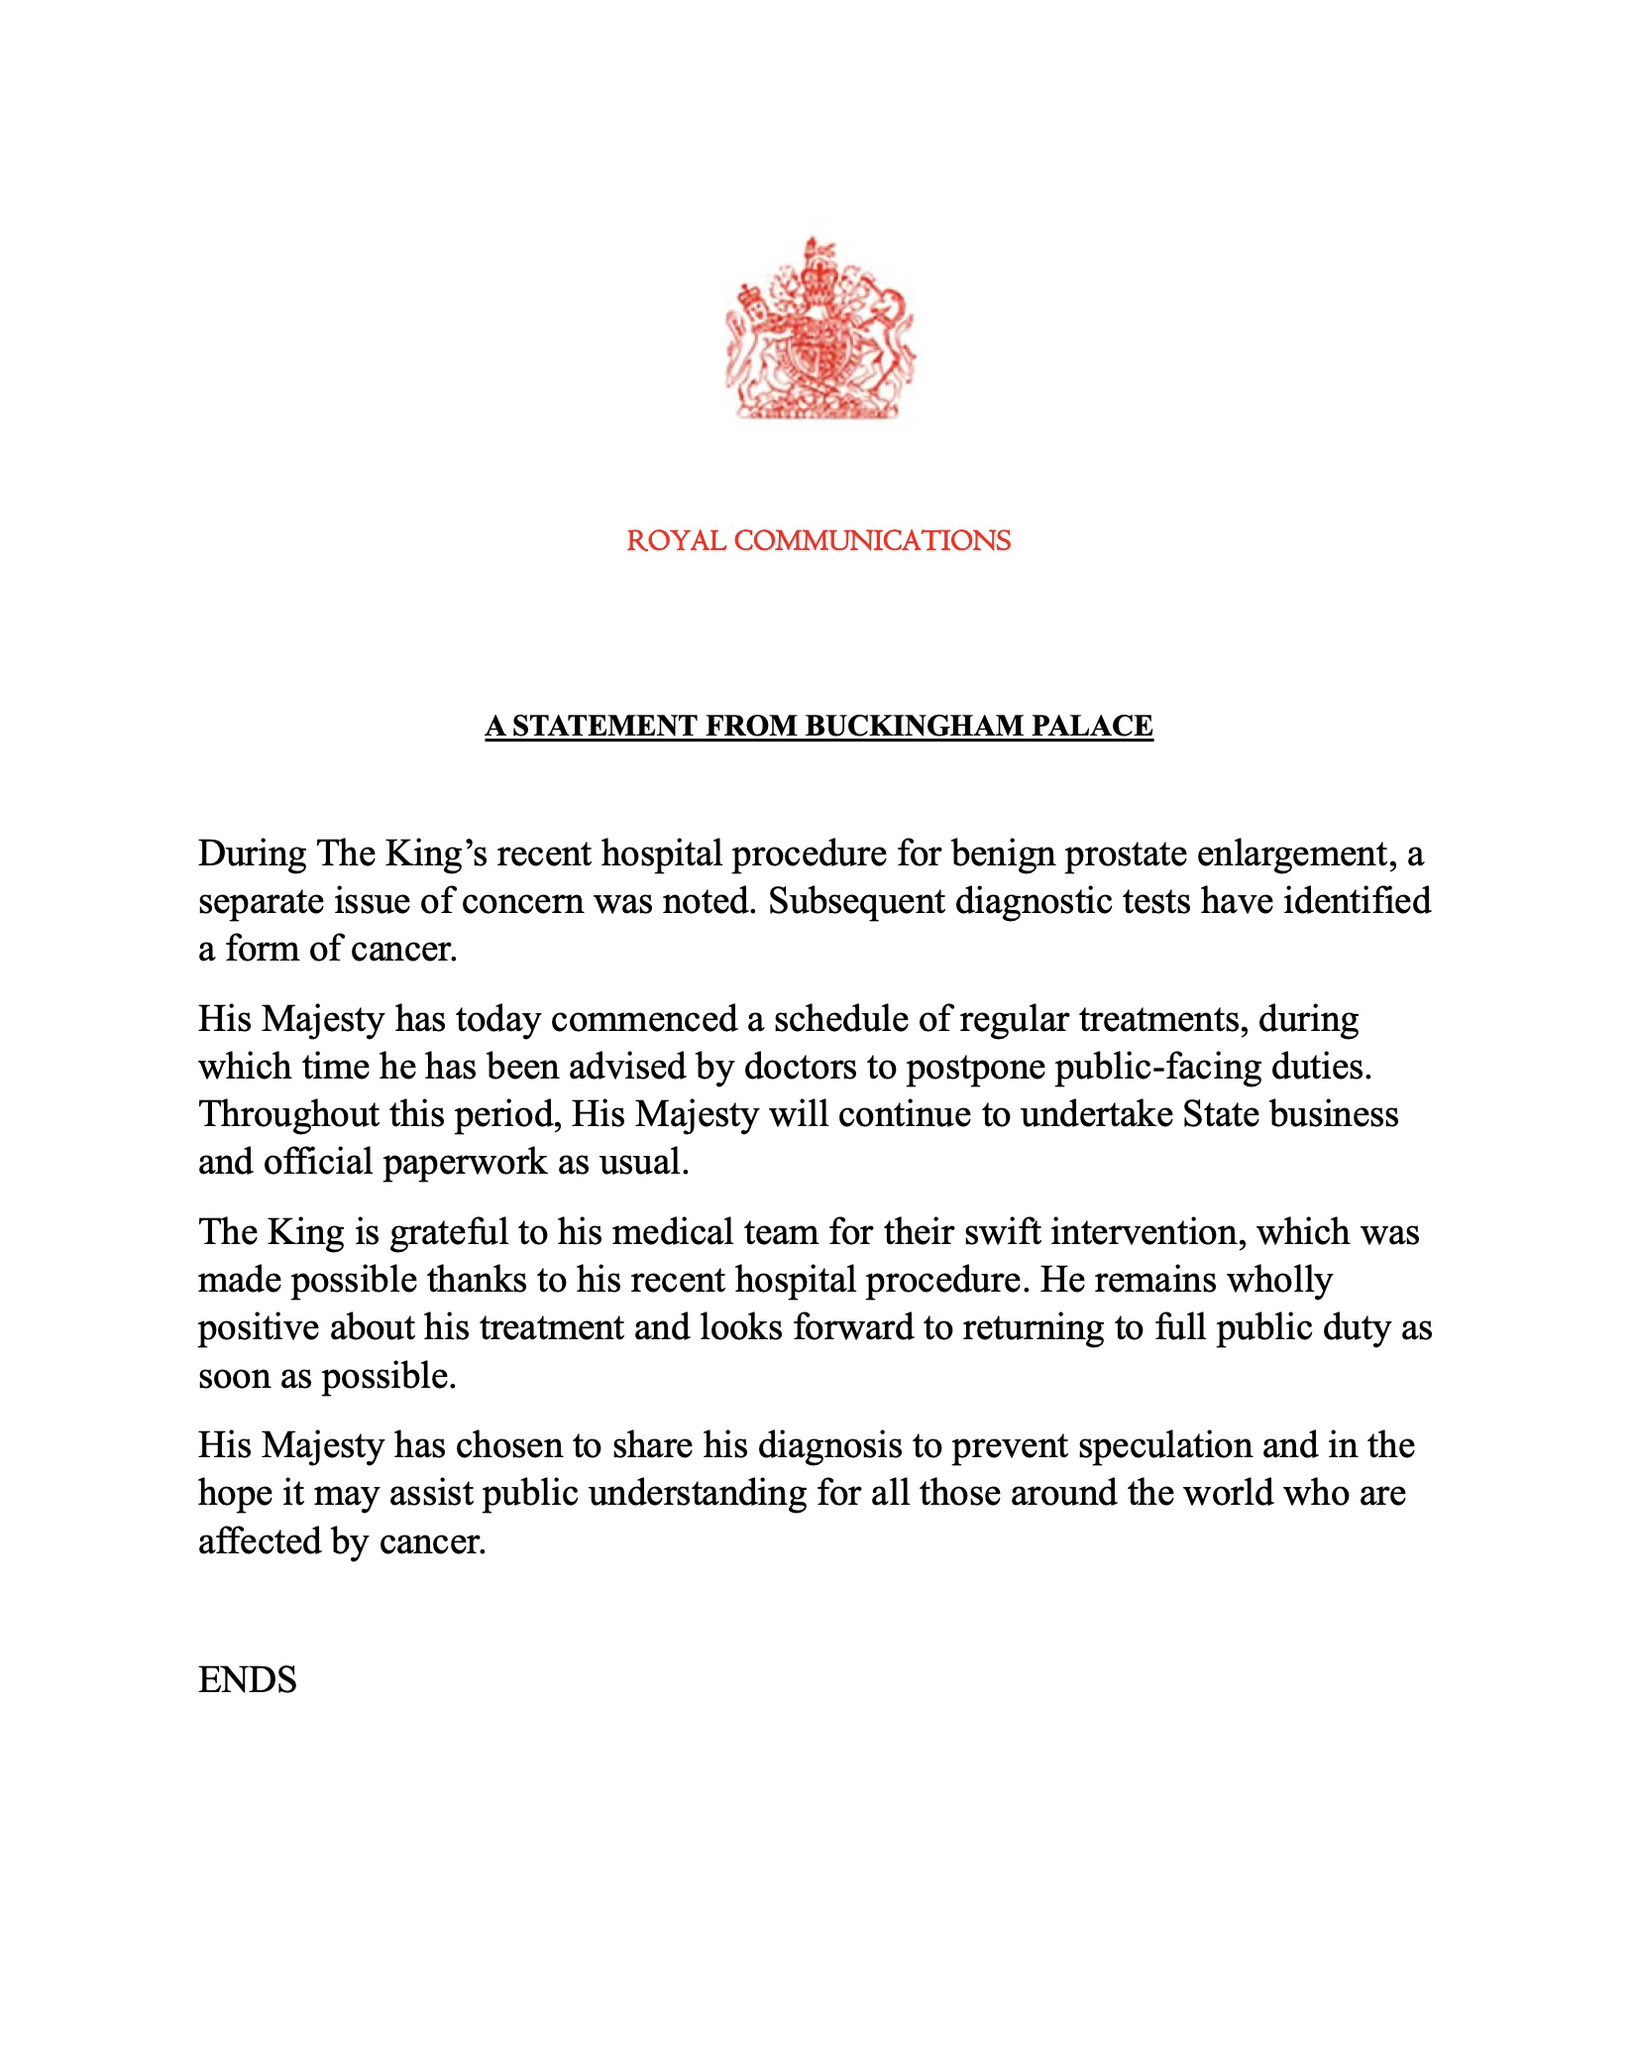 King Charles III Diagnosed with Cancer